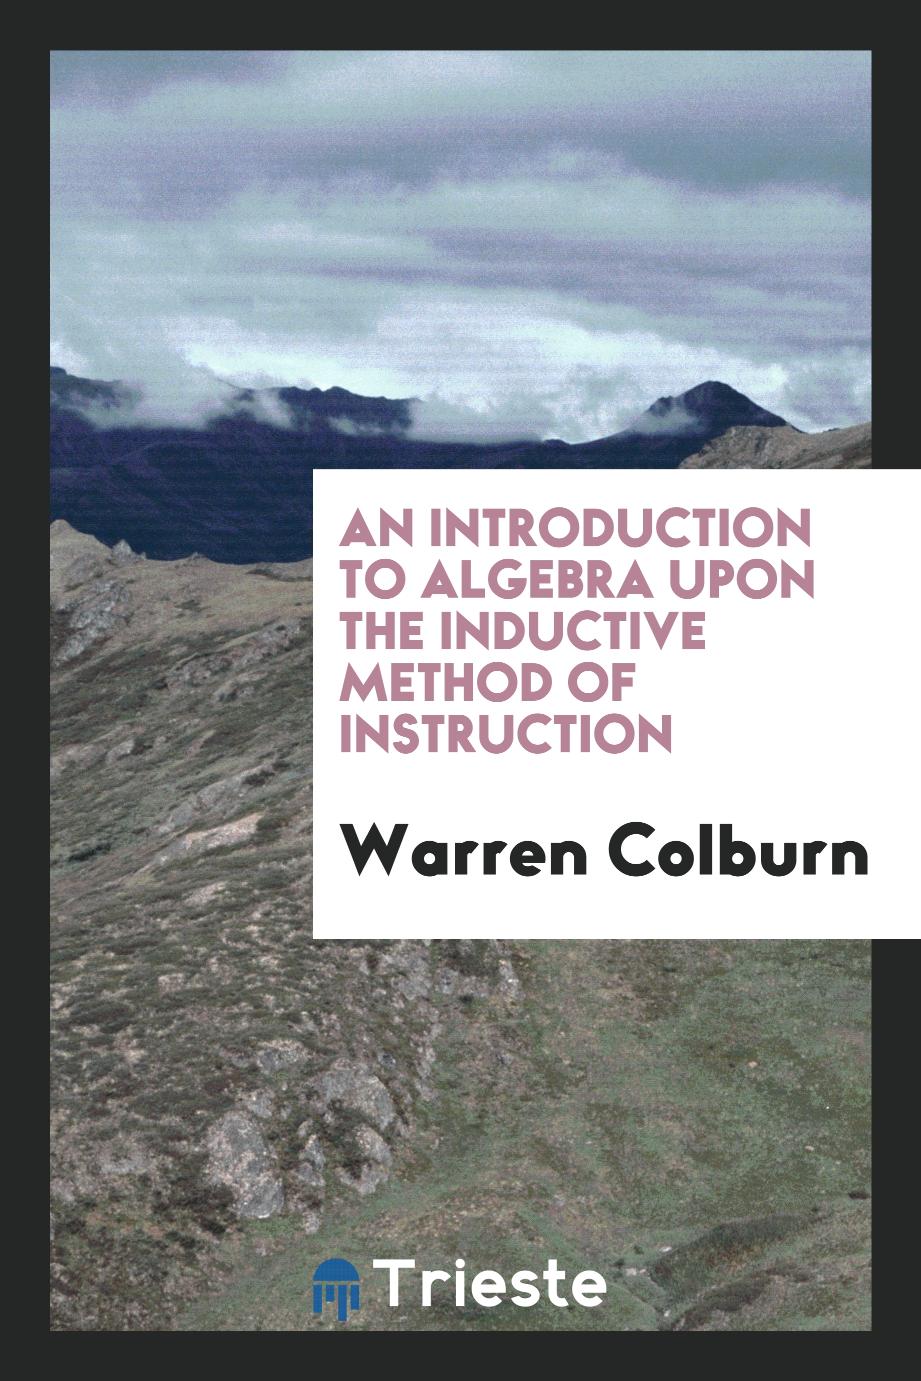 An introduction to algebra upon the inductive method of instruction